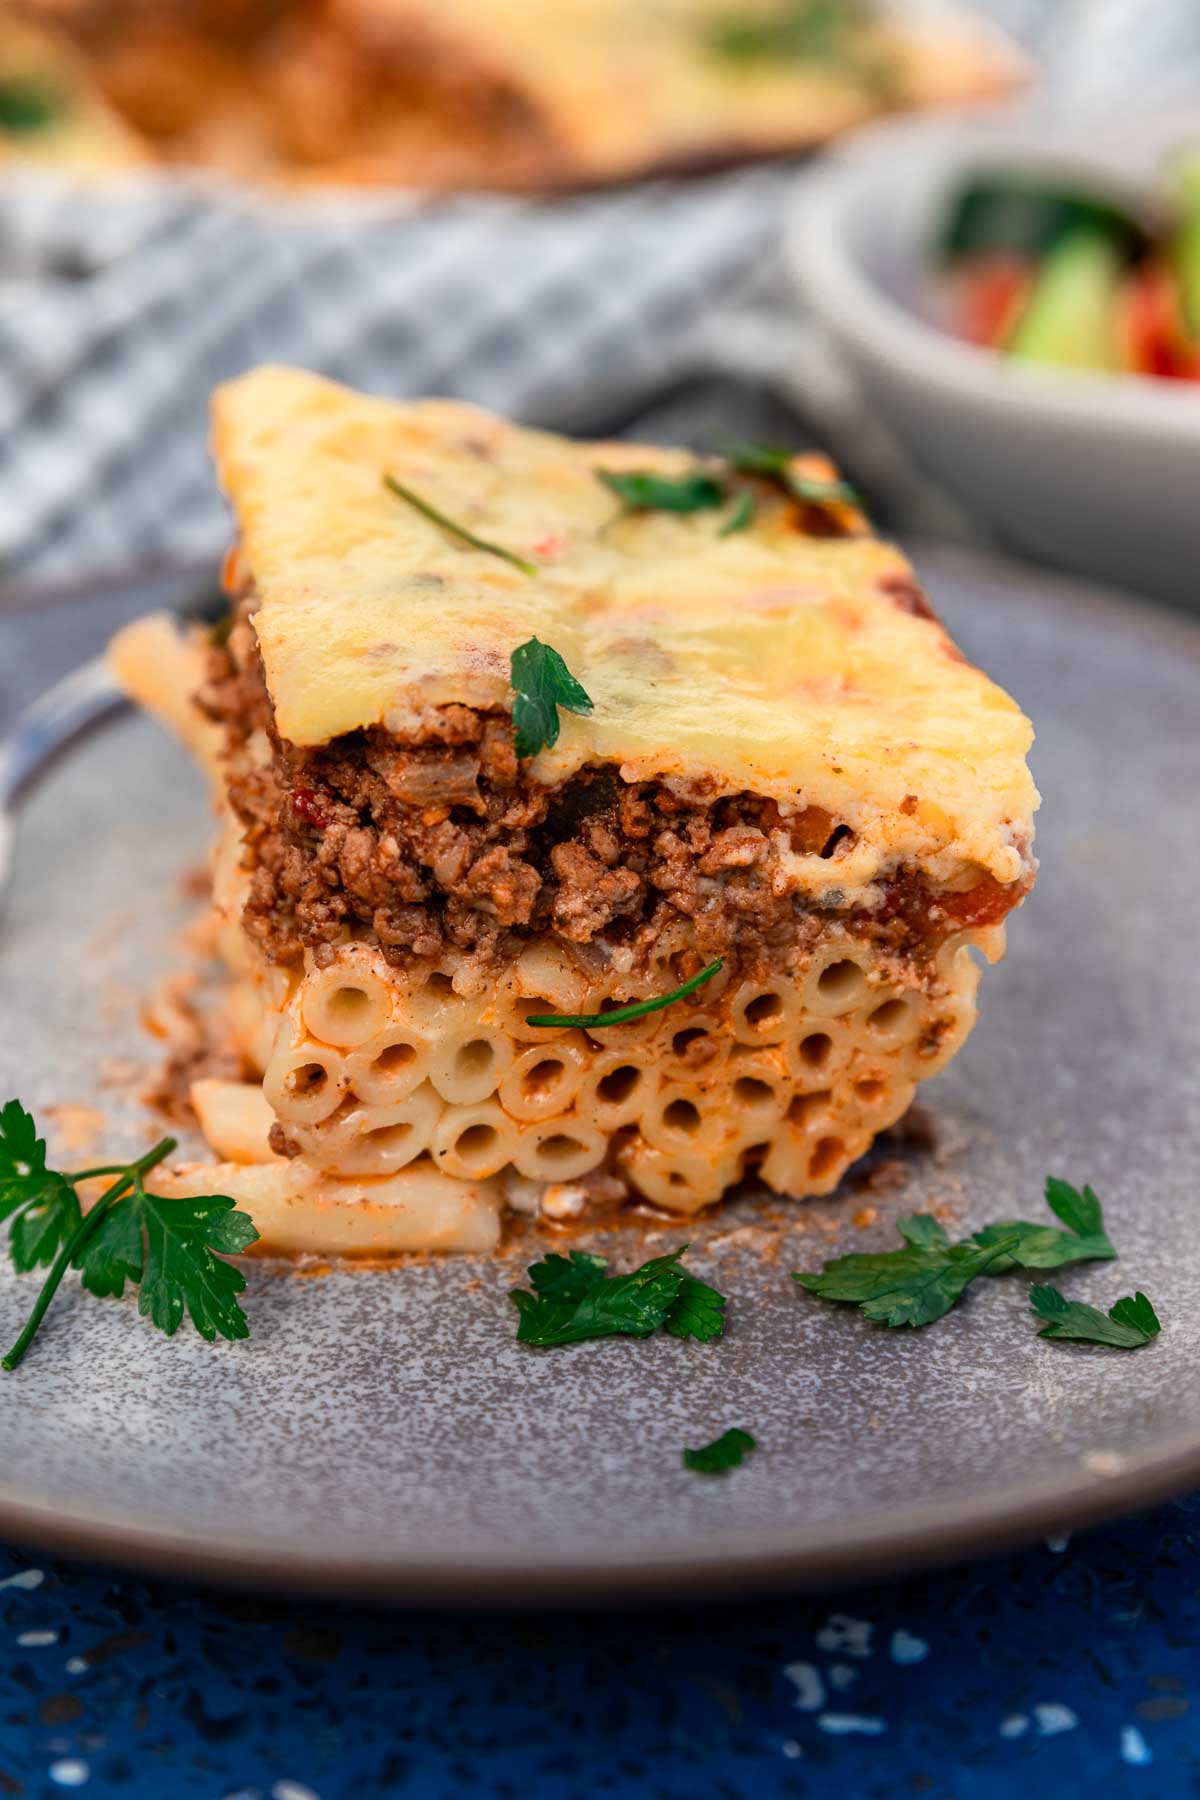 A square of Greek pastitsio with 3 layers - tube pasta, beef ragu sauce and bechamel sauce, on a blue plate and blue background and with a Greek salad and the baking pan with more pastitsio just visible in the background.